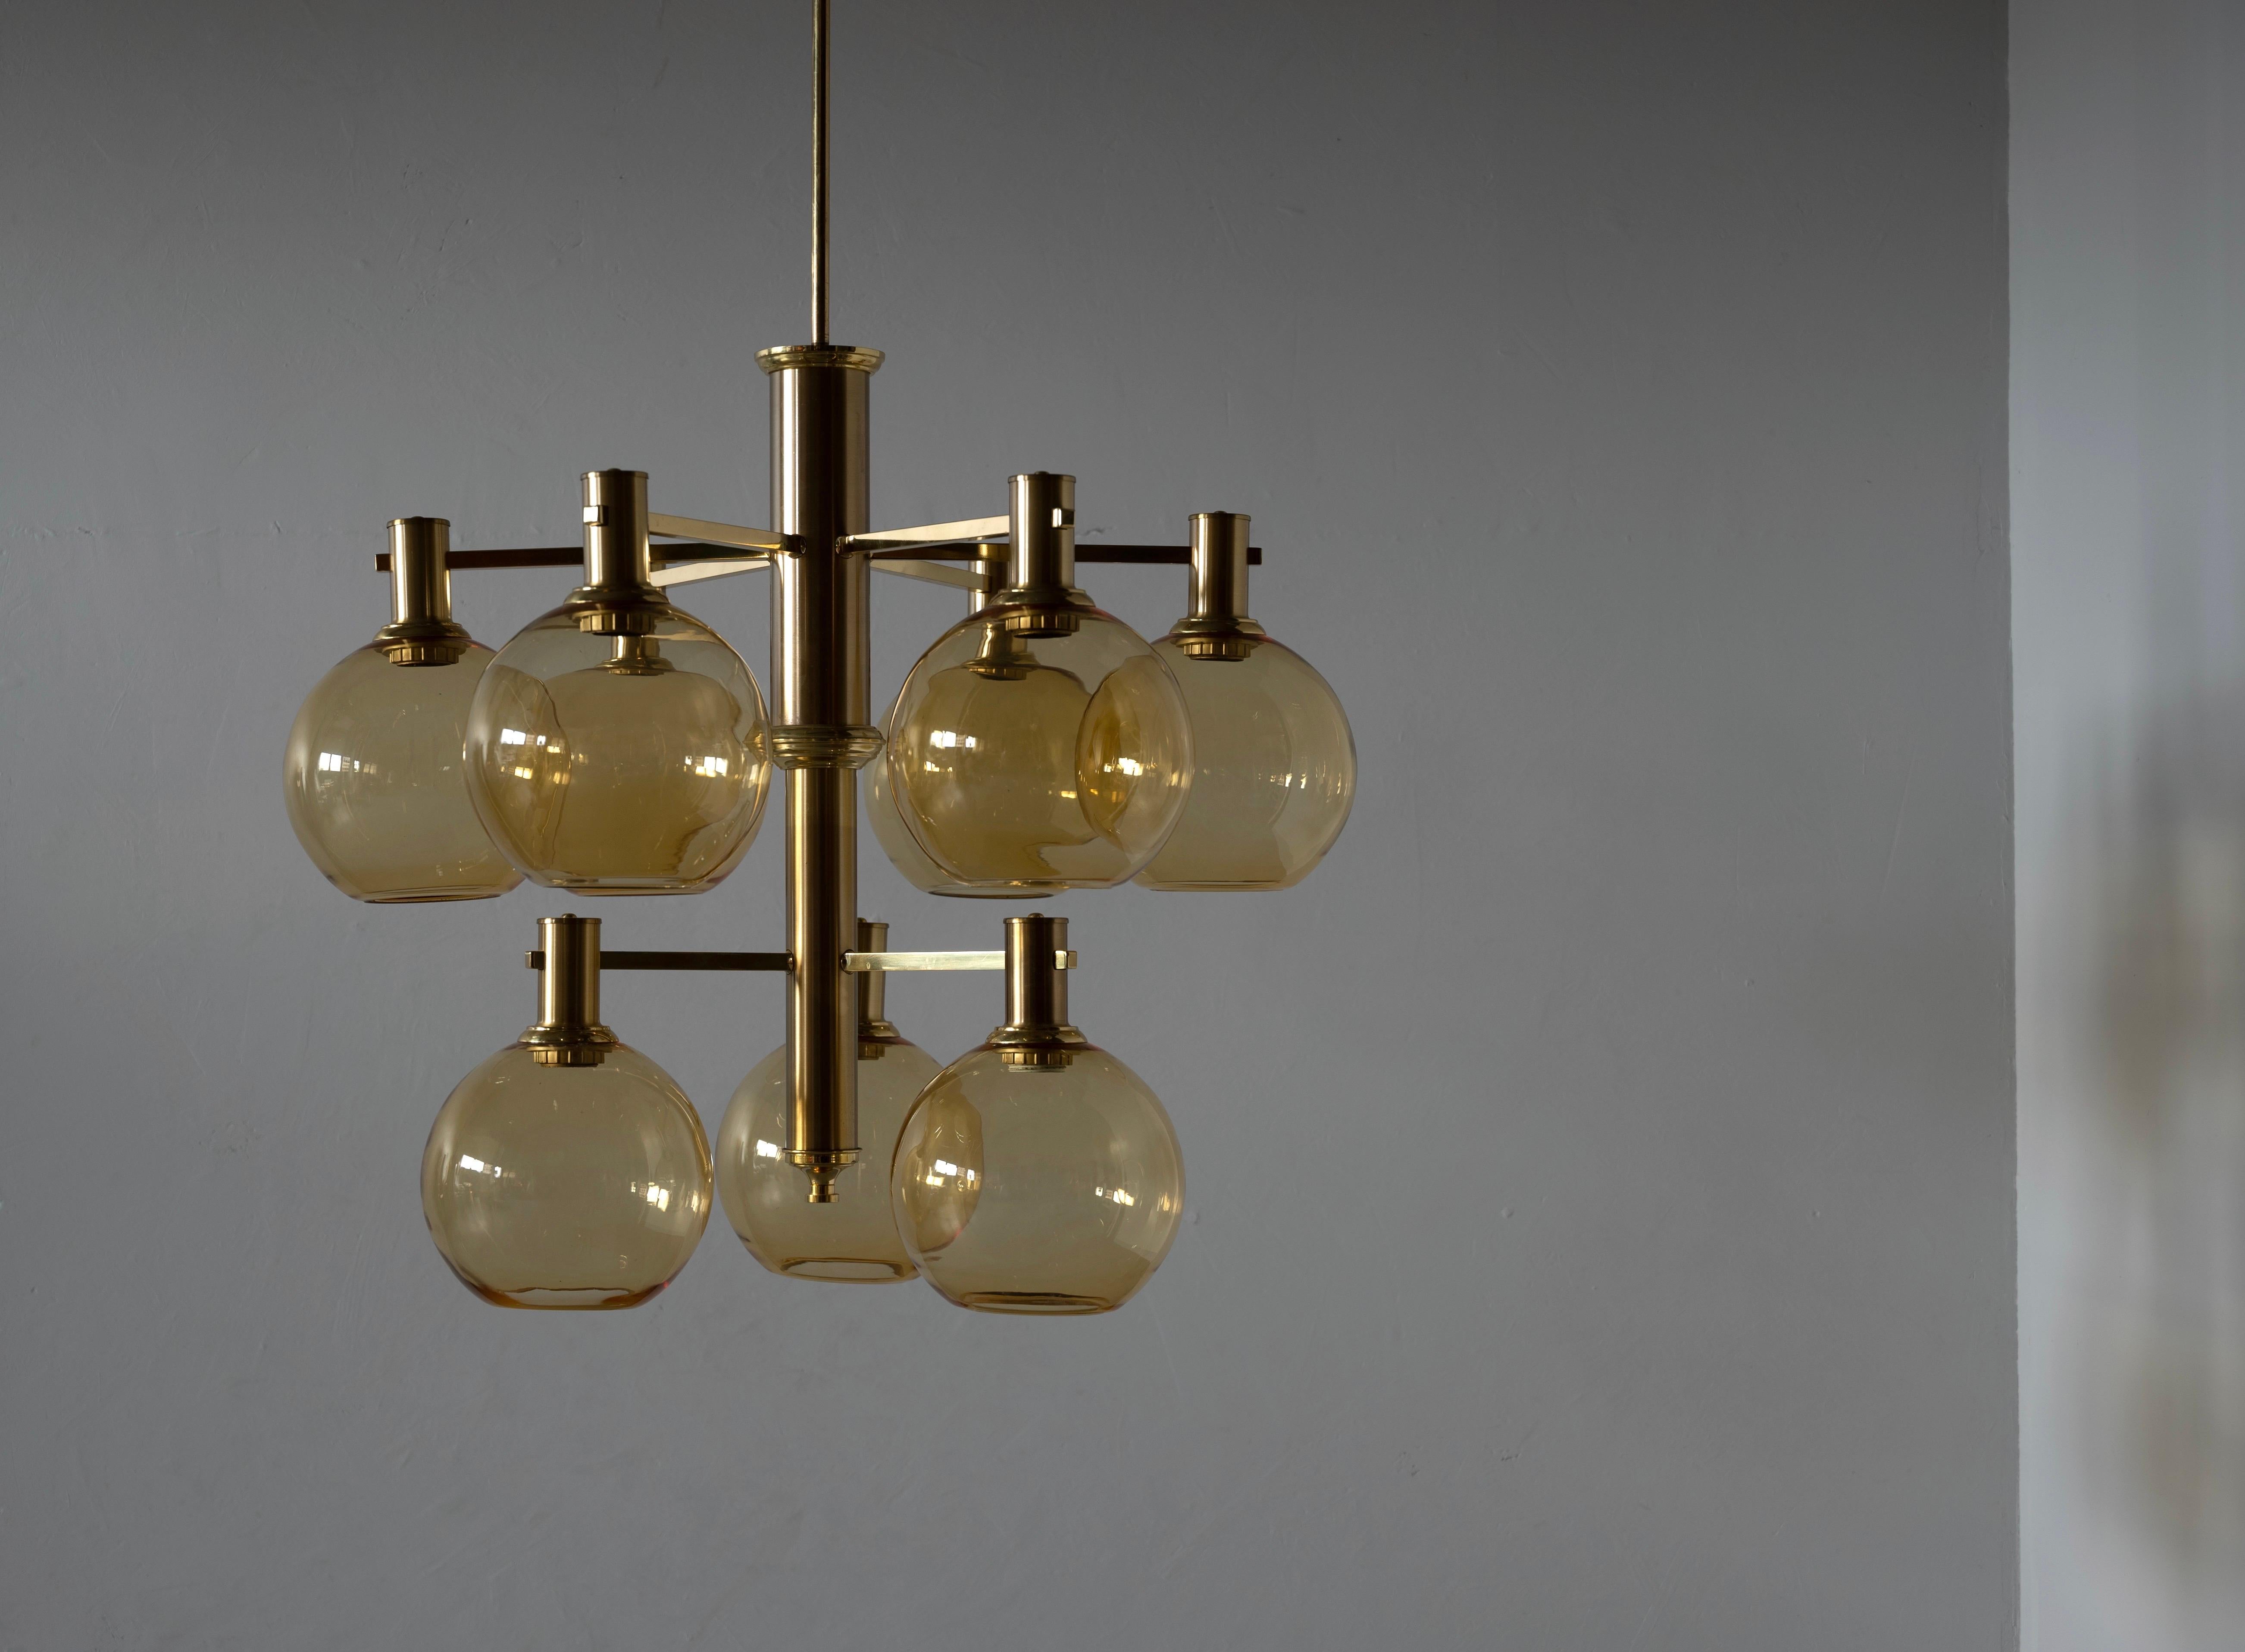 A sizable chandelier. Designed and produced by Eric Wärnå, for EWÅ Värnamo, Sweden, c. 1960s. Height includes full drop.

Other designers of the period include Hans-Agne Jacobsen, Paavo Tynell, Josef Frank, Alvar Aalto, and Angelo Lelii.